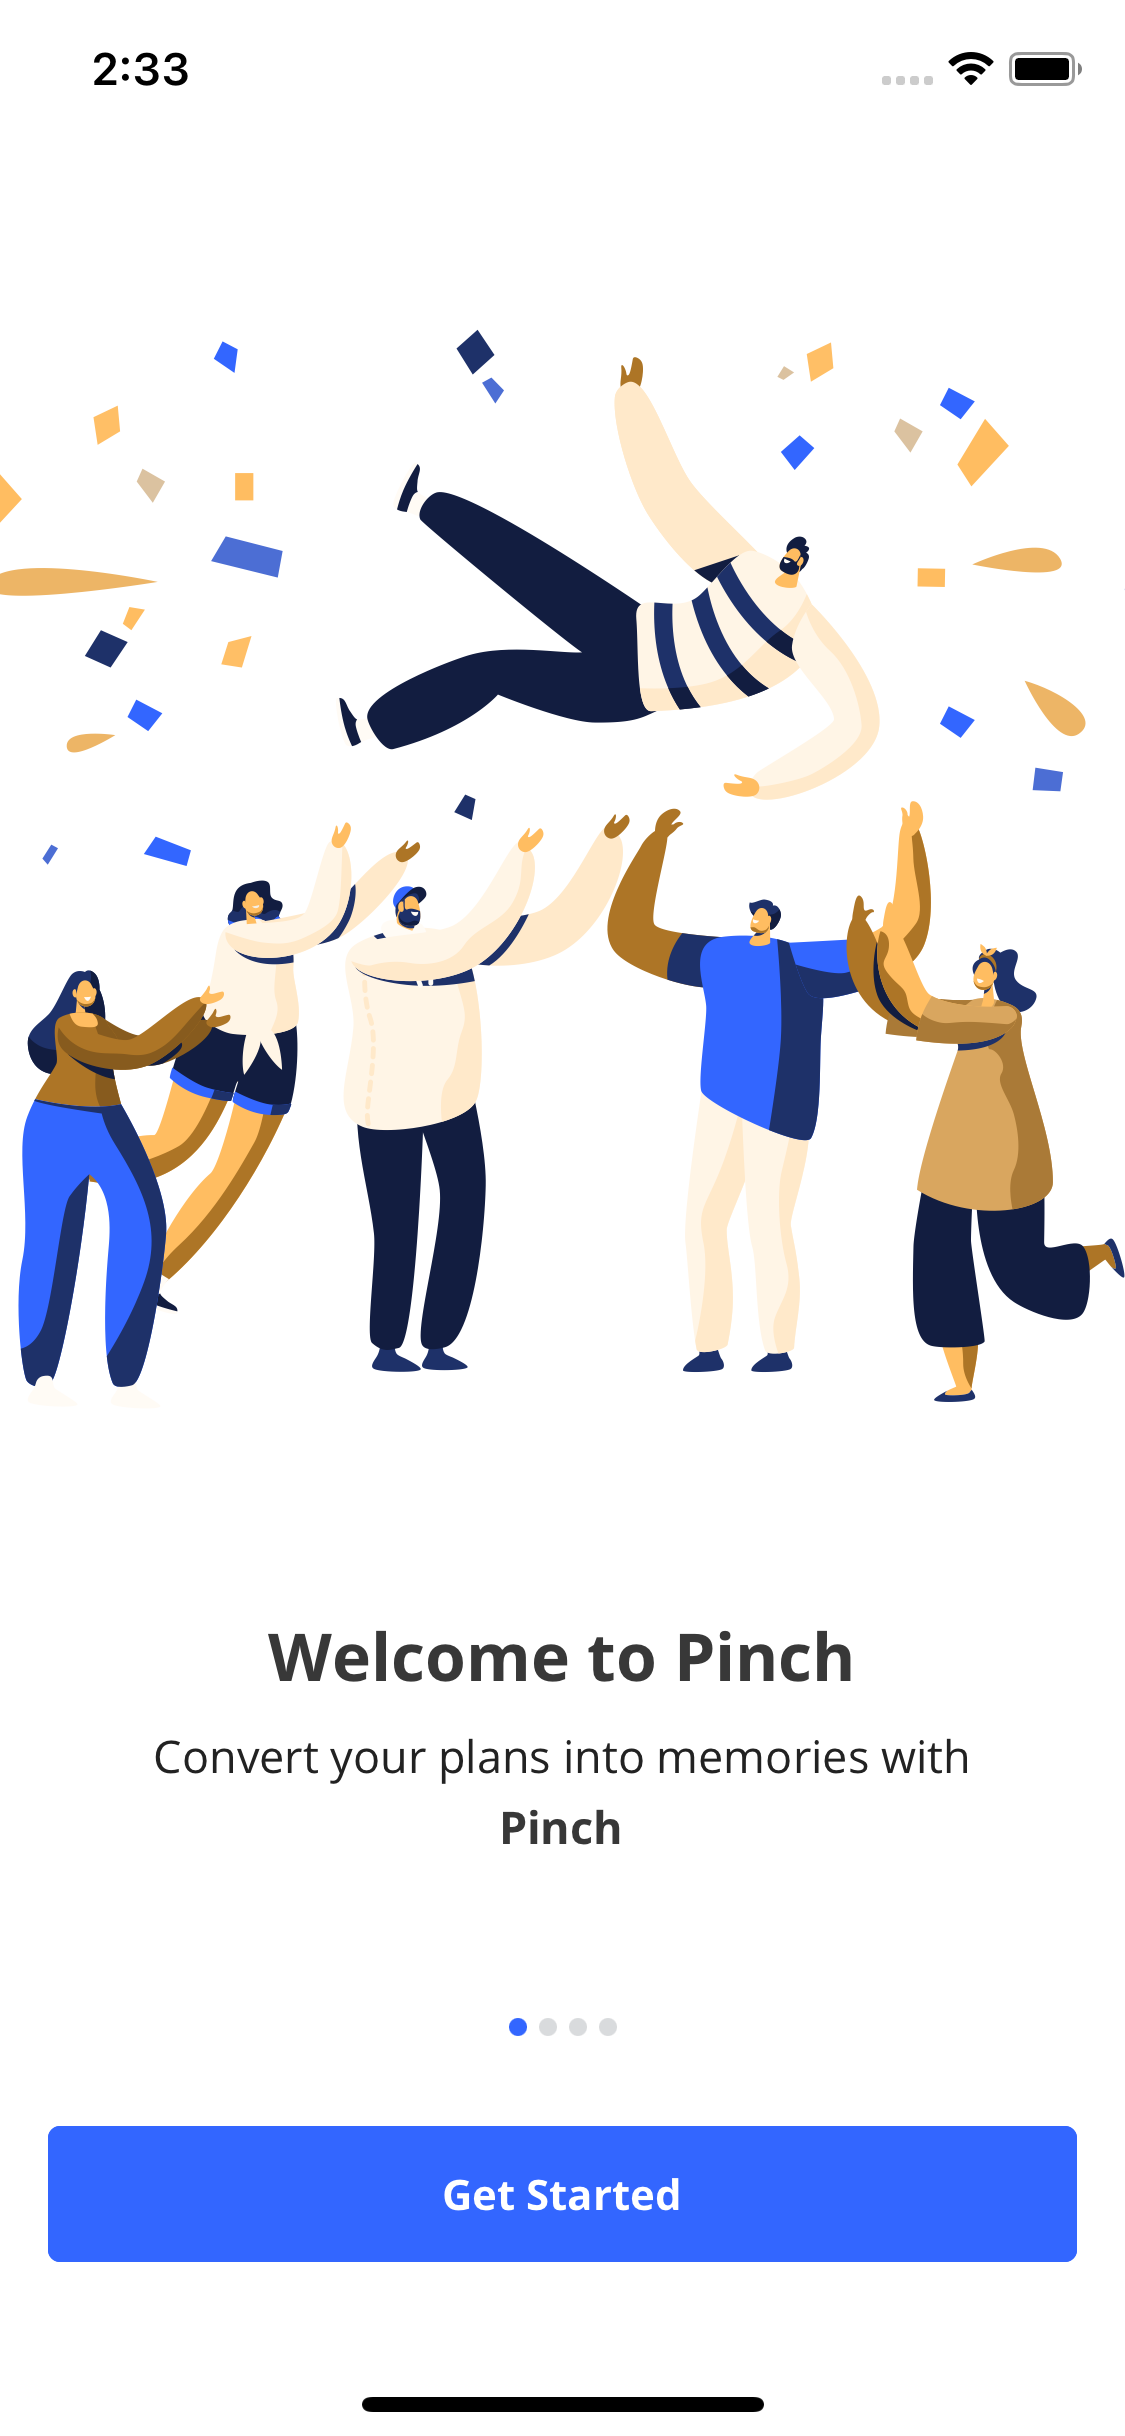 Welcome to Pinch